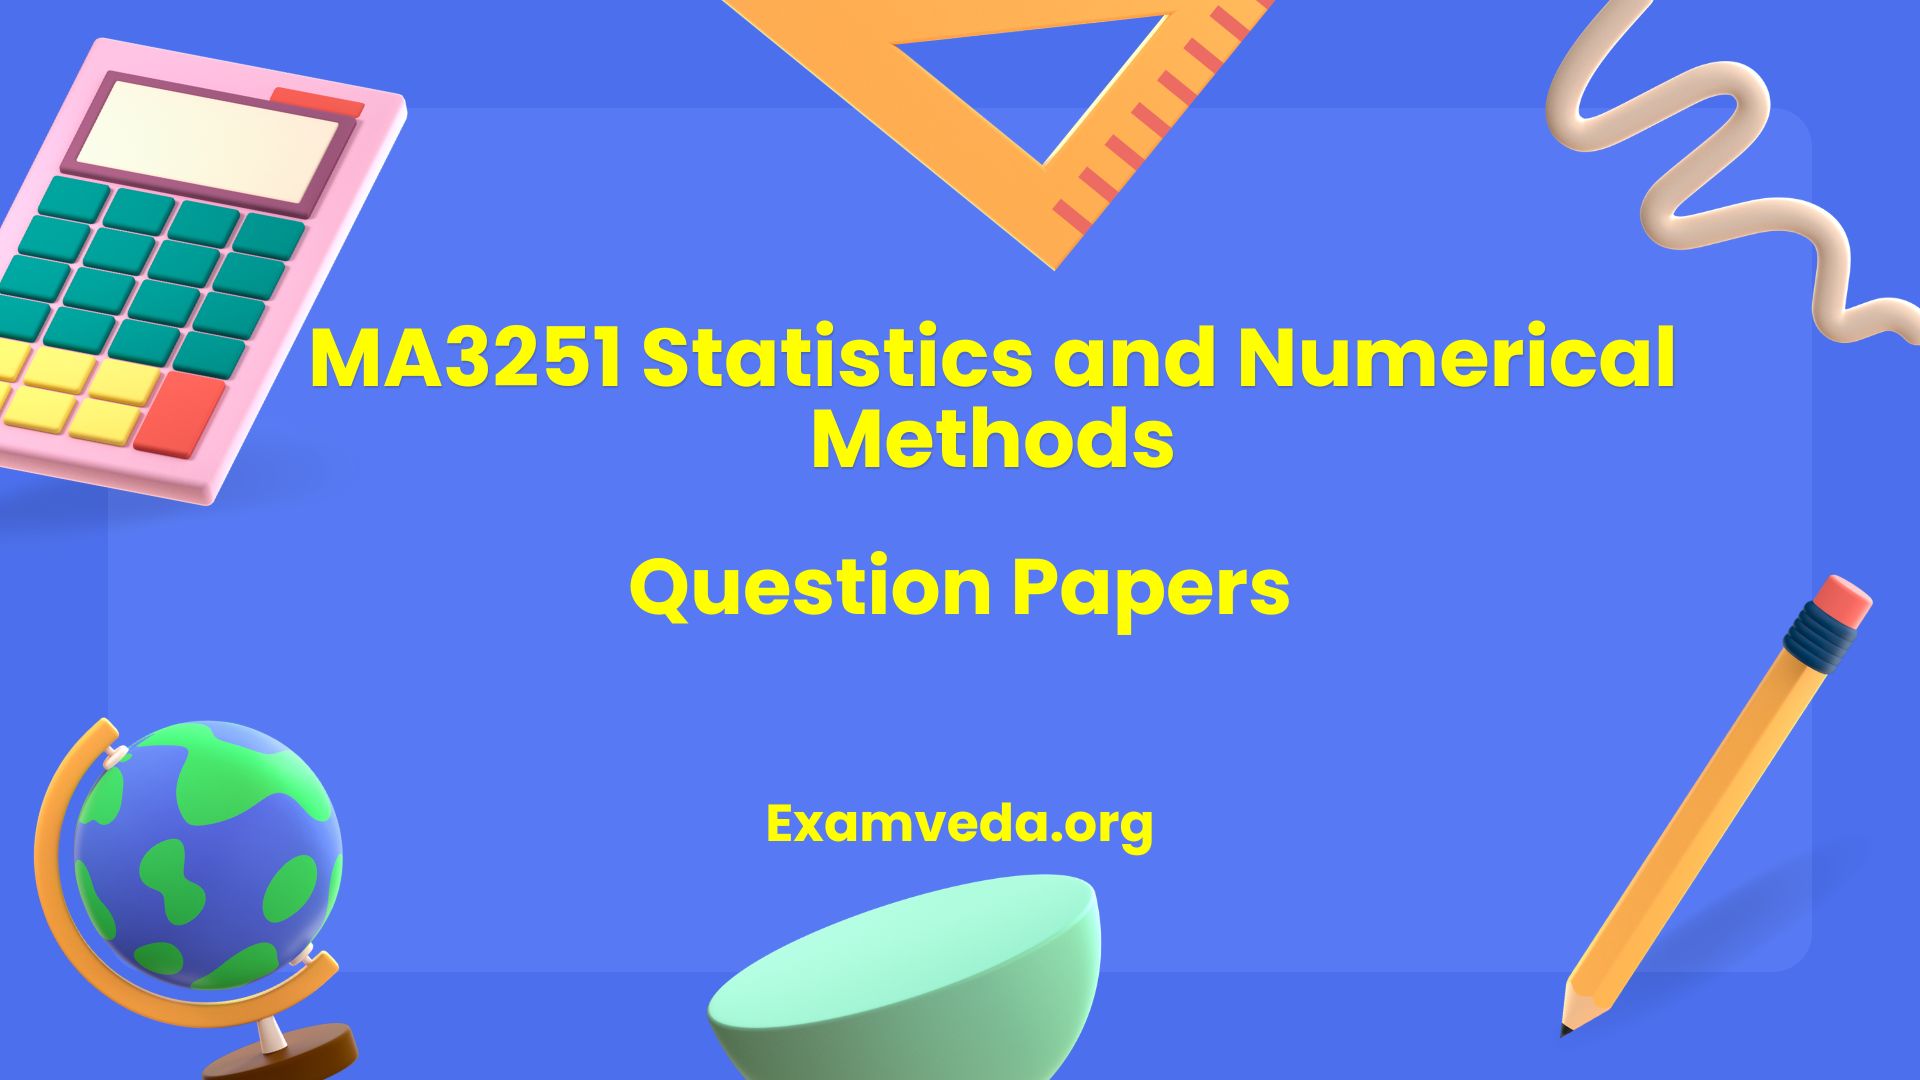 MA3251 Statistics and Numerical Methods Question Papers